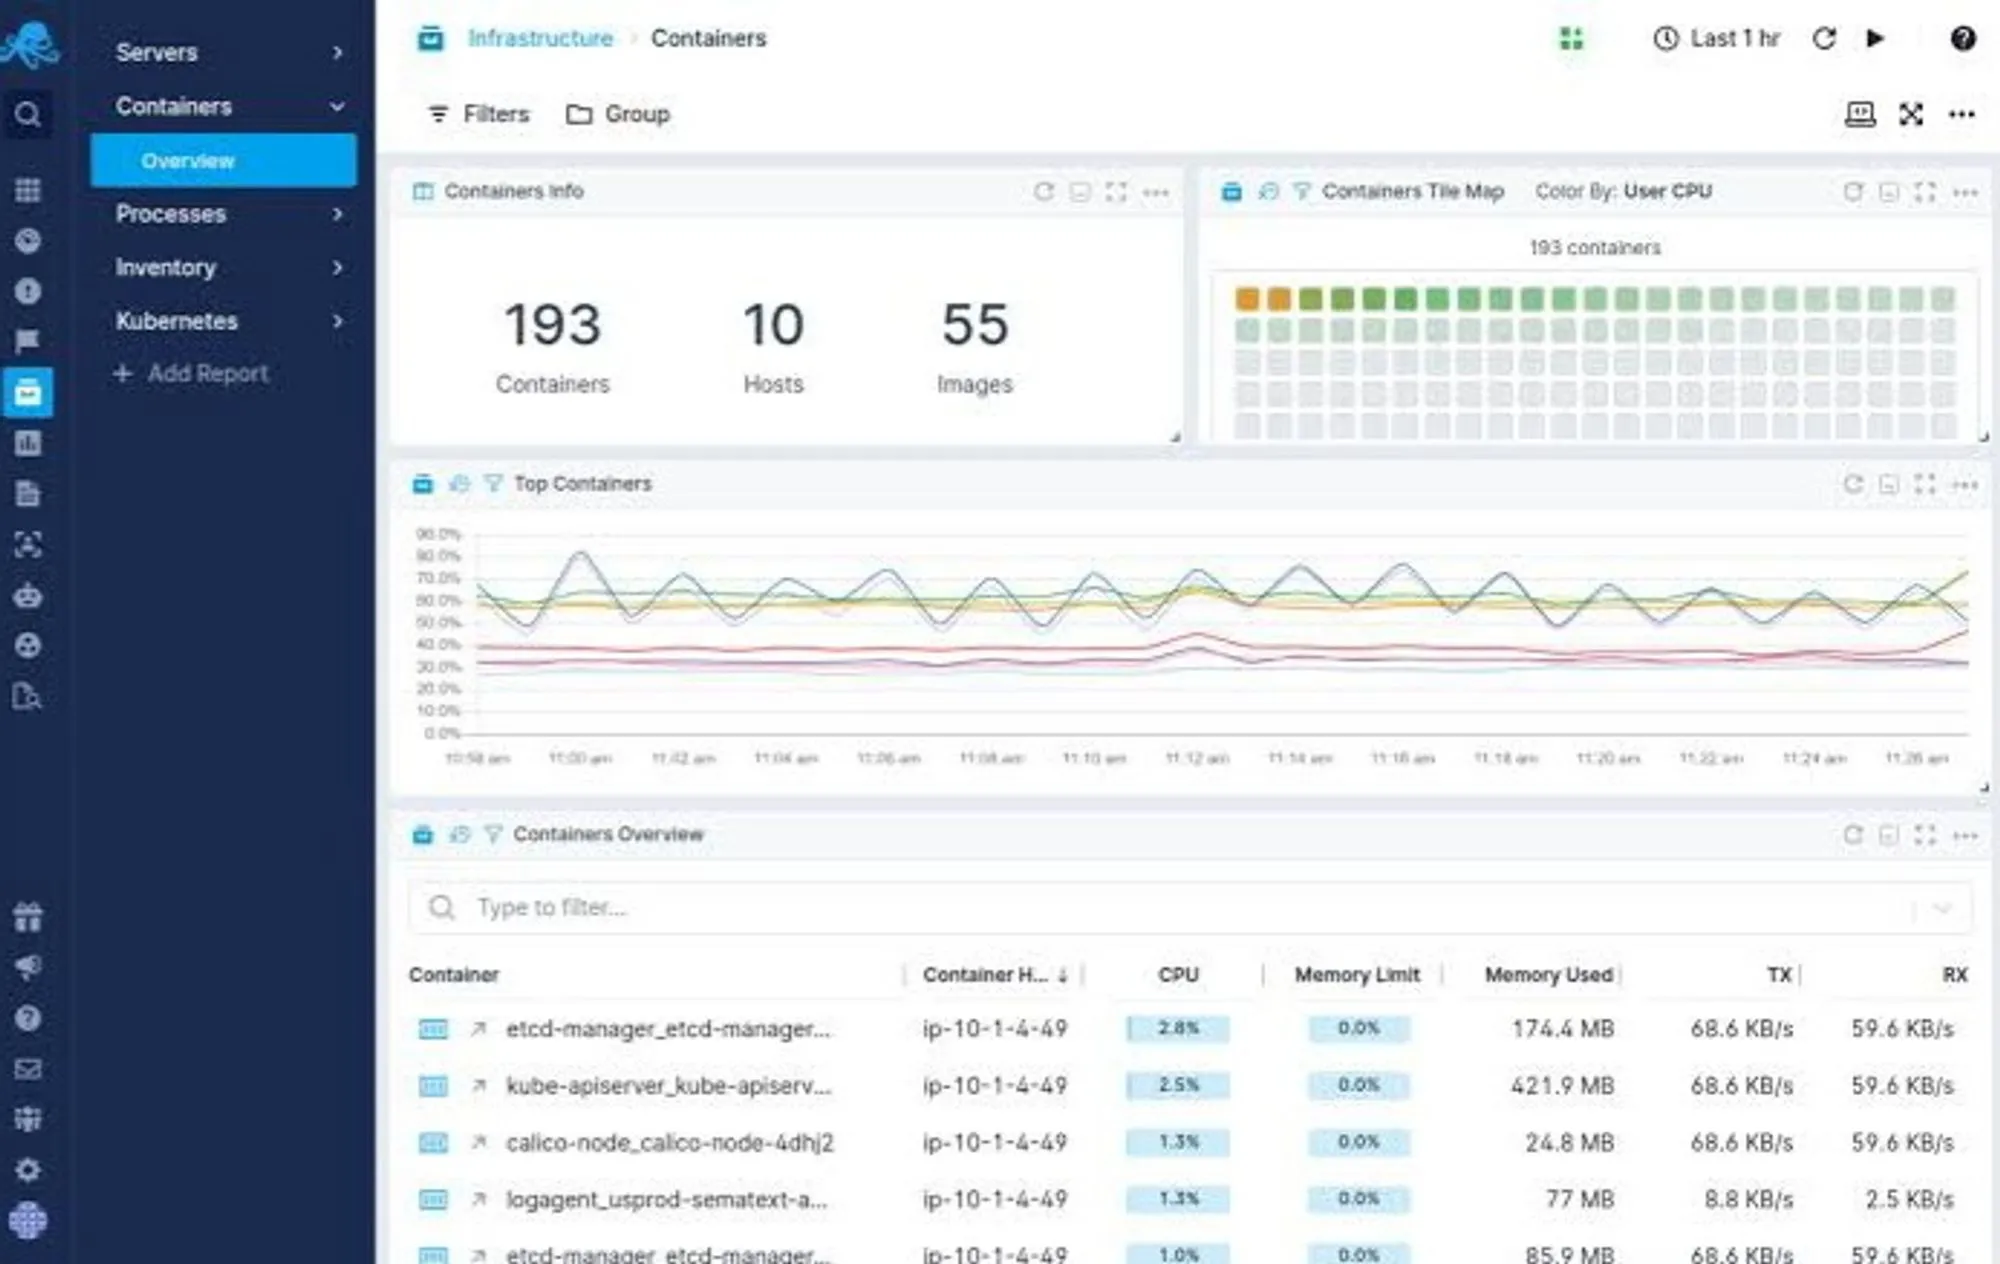 Sematext dashboards